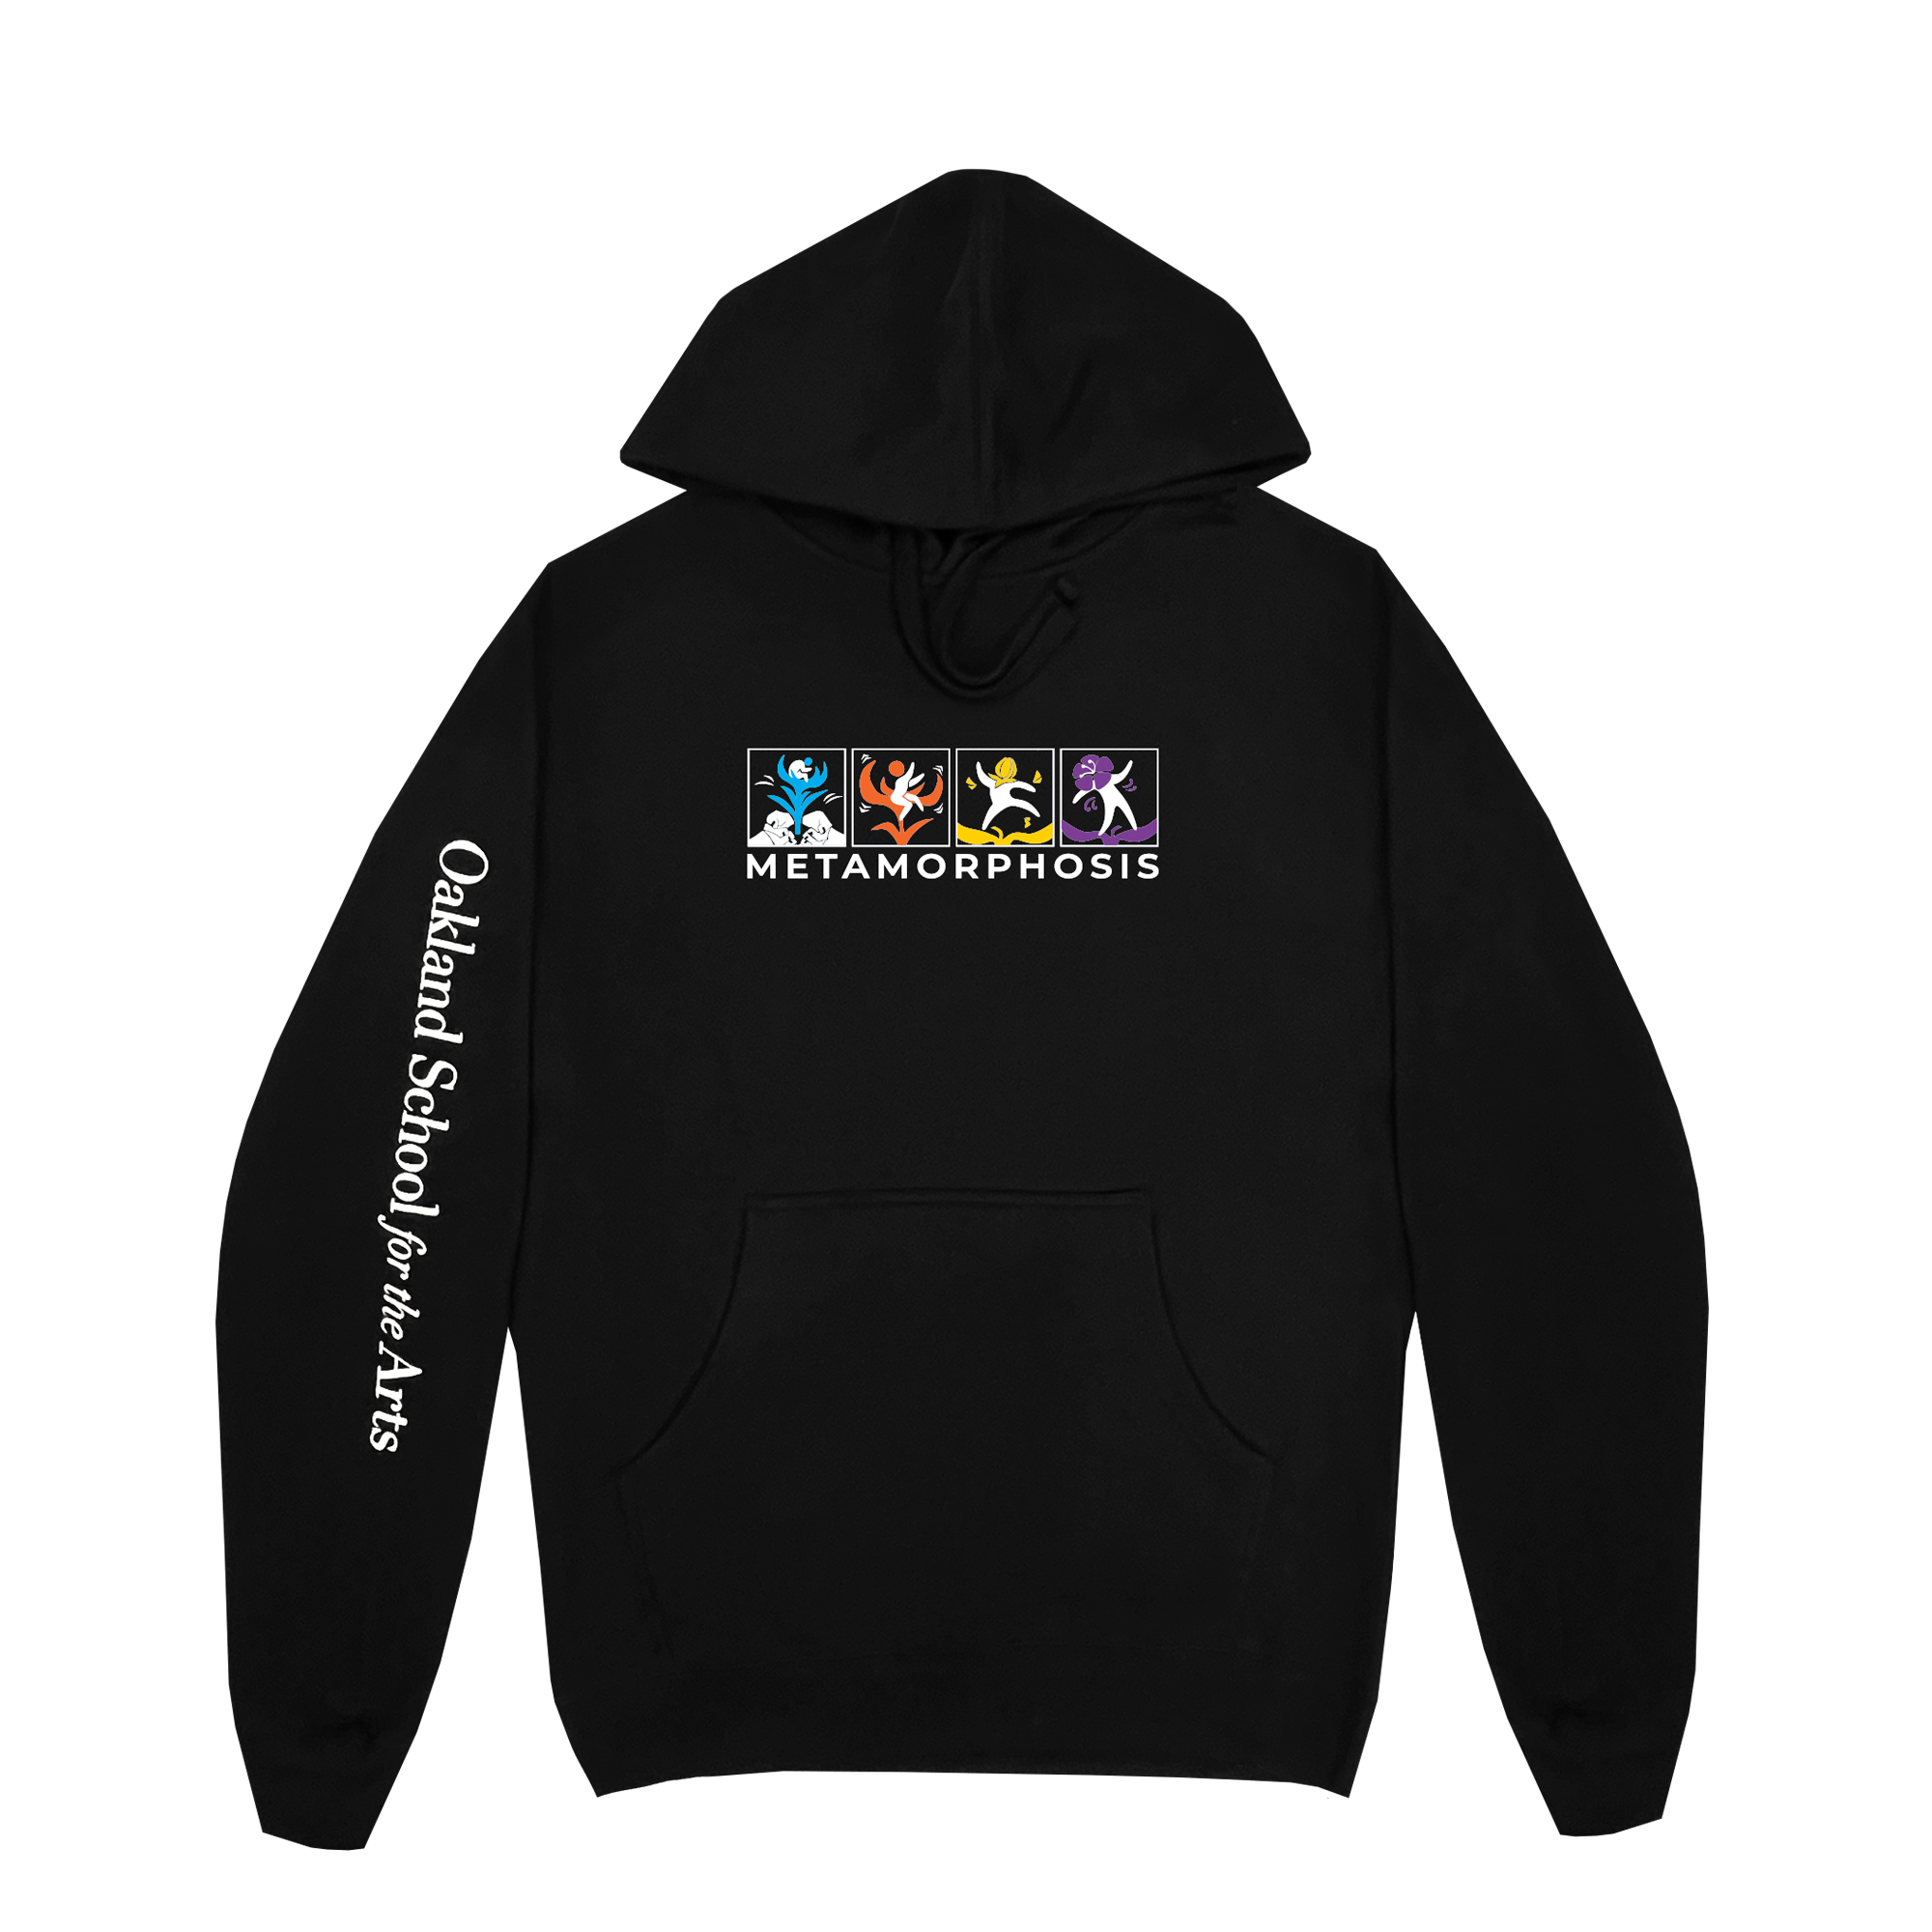 Black hooded sweatshirt with Oakland School for the Arts wordmark on left arm and full-color METAMORPHOSIS logo on the front chest.